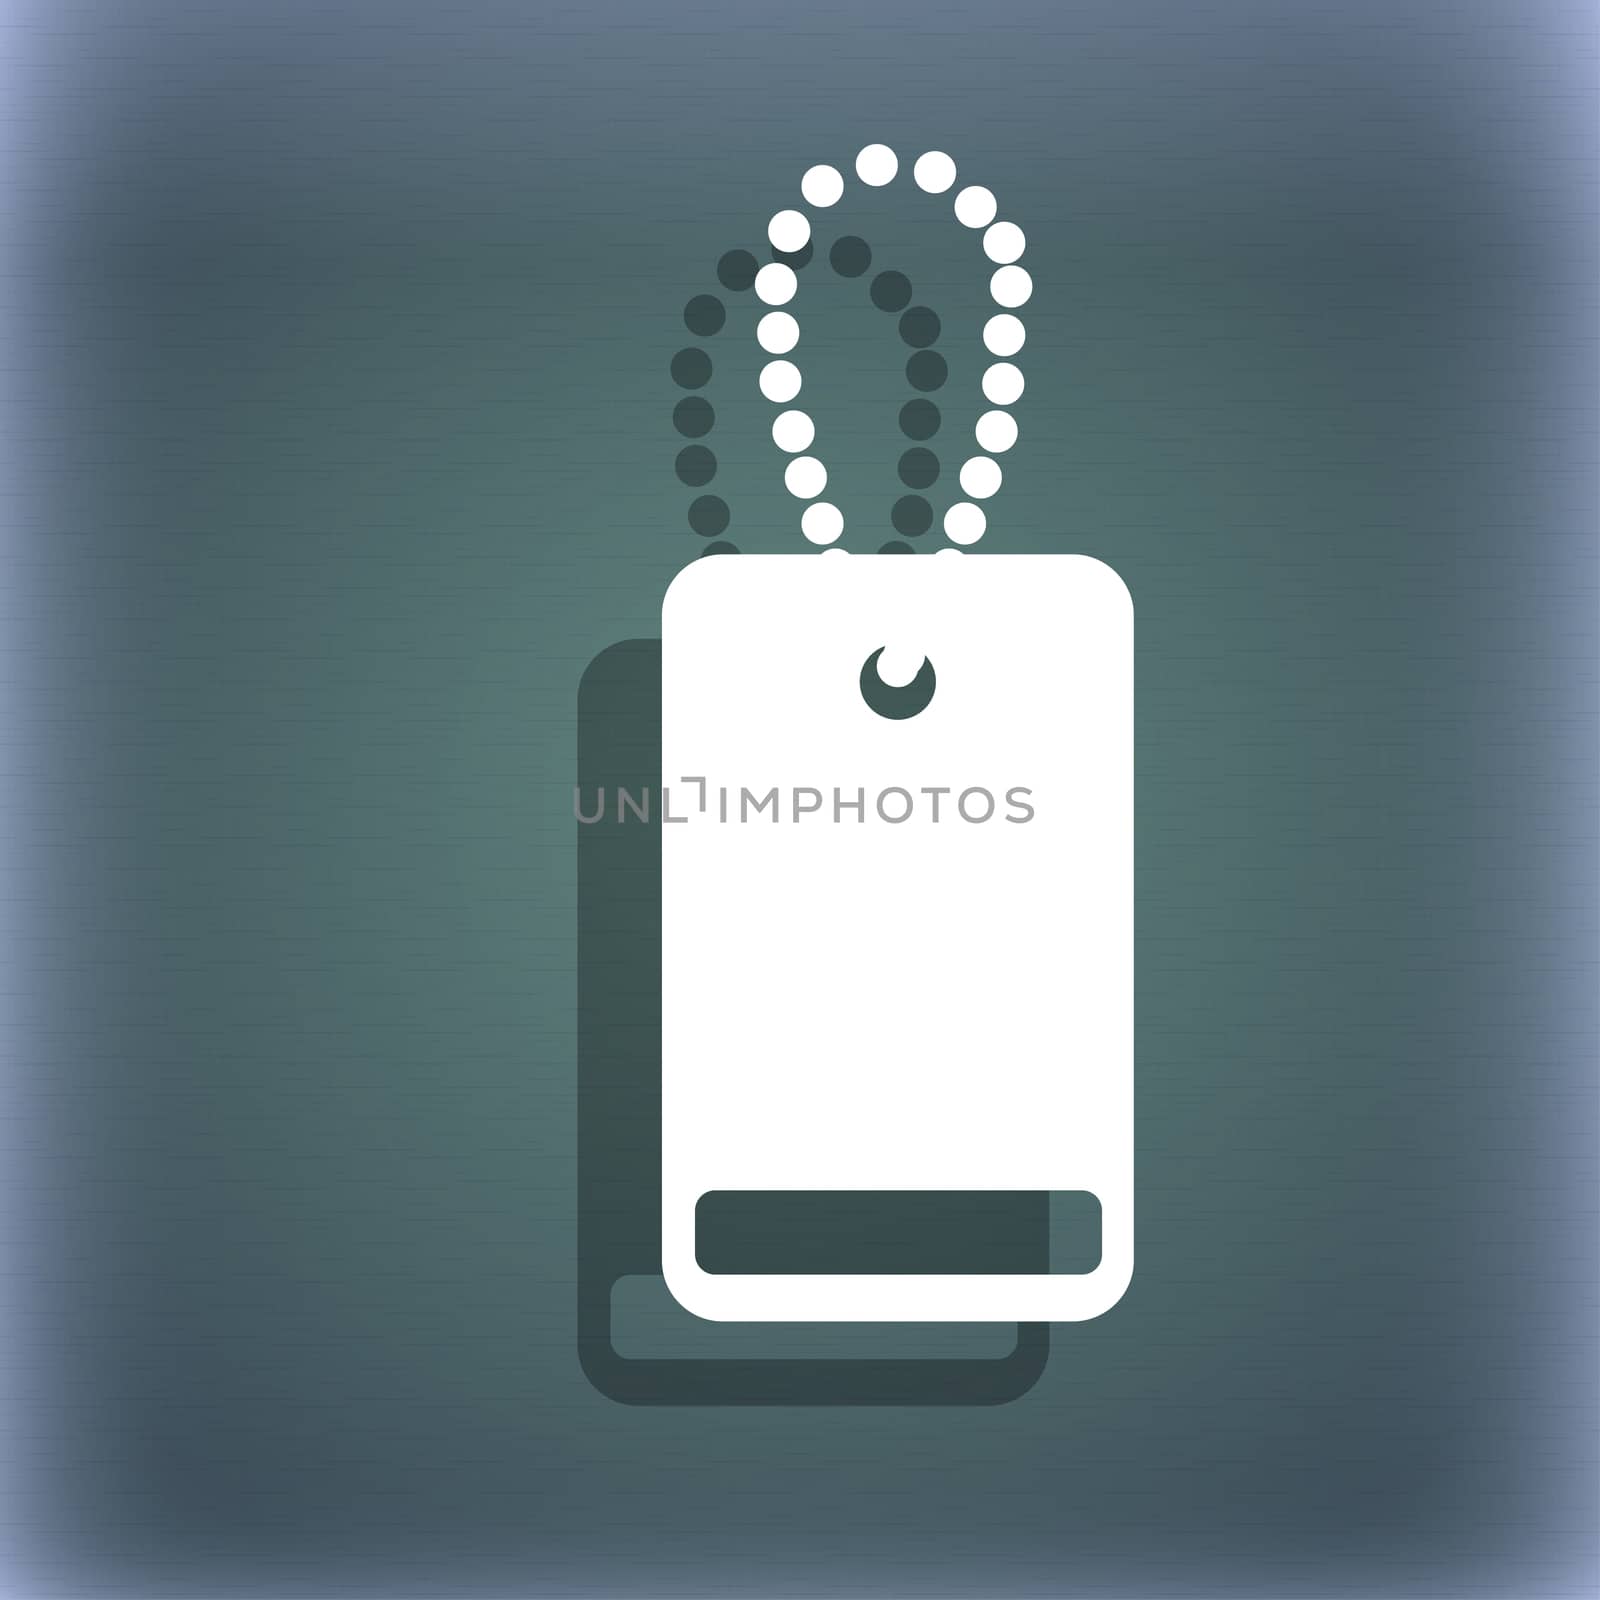 army chains icon sign. On the blue-green abstract background with shadow and space for your text. illustration